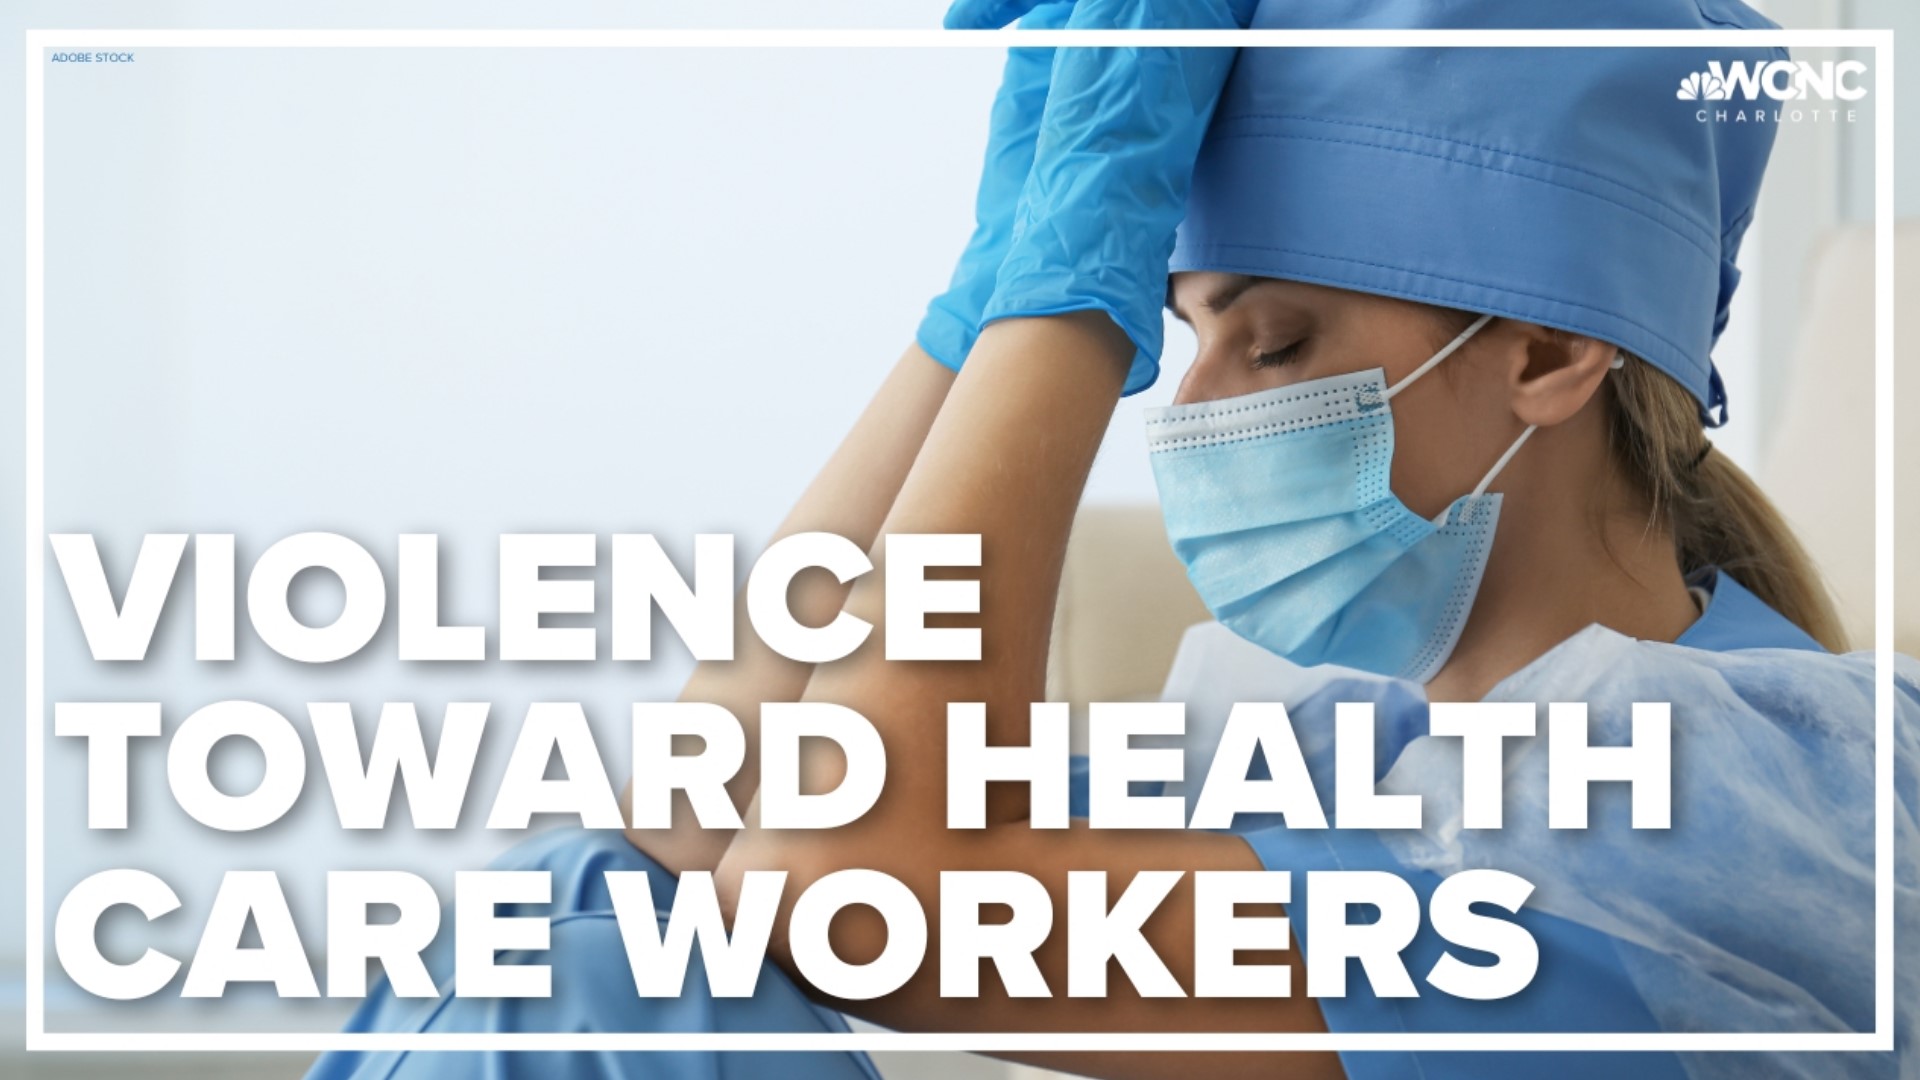 Since the start of the pandemic, attacks against health care workers have increased significantly at hospitals and doctors' offices across the country.